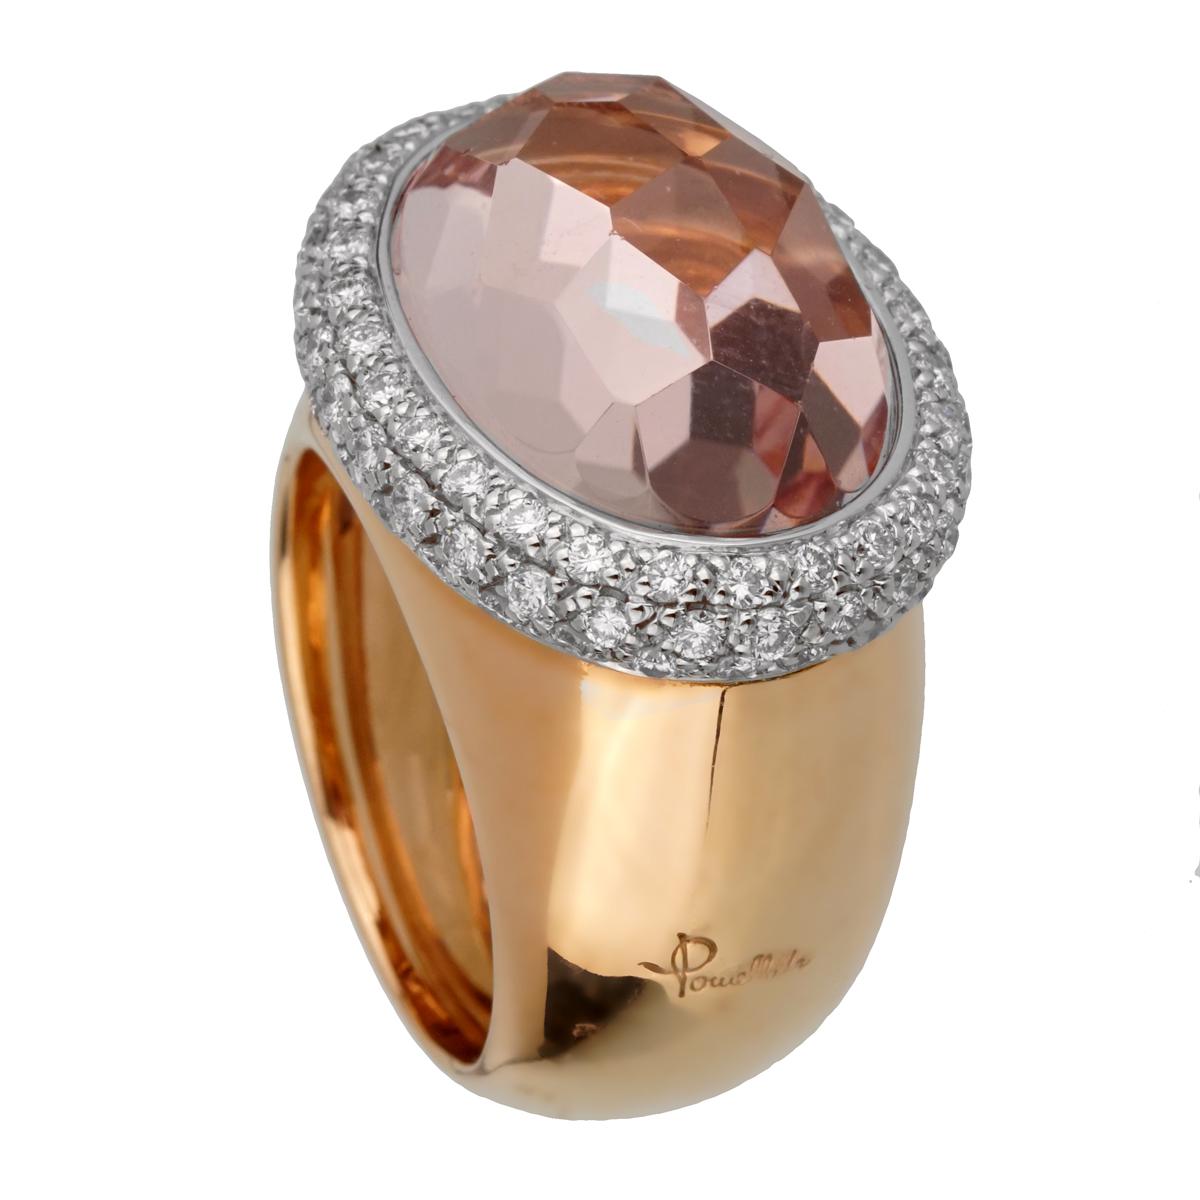 A magnificent brand new Pomellato ring showcasing a 13.40ct Morganite stone wrapped by 1.20 ct of round brilliant cut diamonds in 18k rose gold. The ring measures a size 6.5 and can be resized.

Pomellato Retail Price: $14,500
Sku: 2447